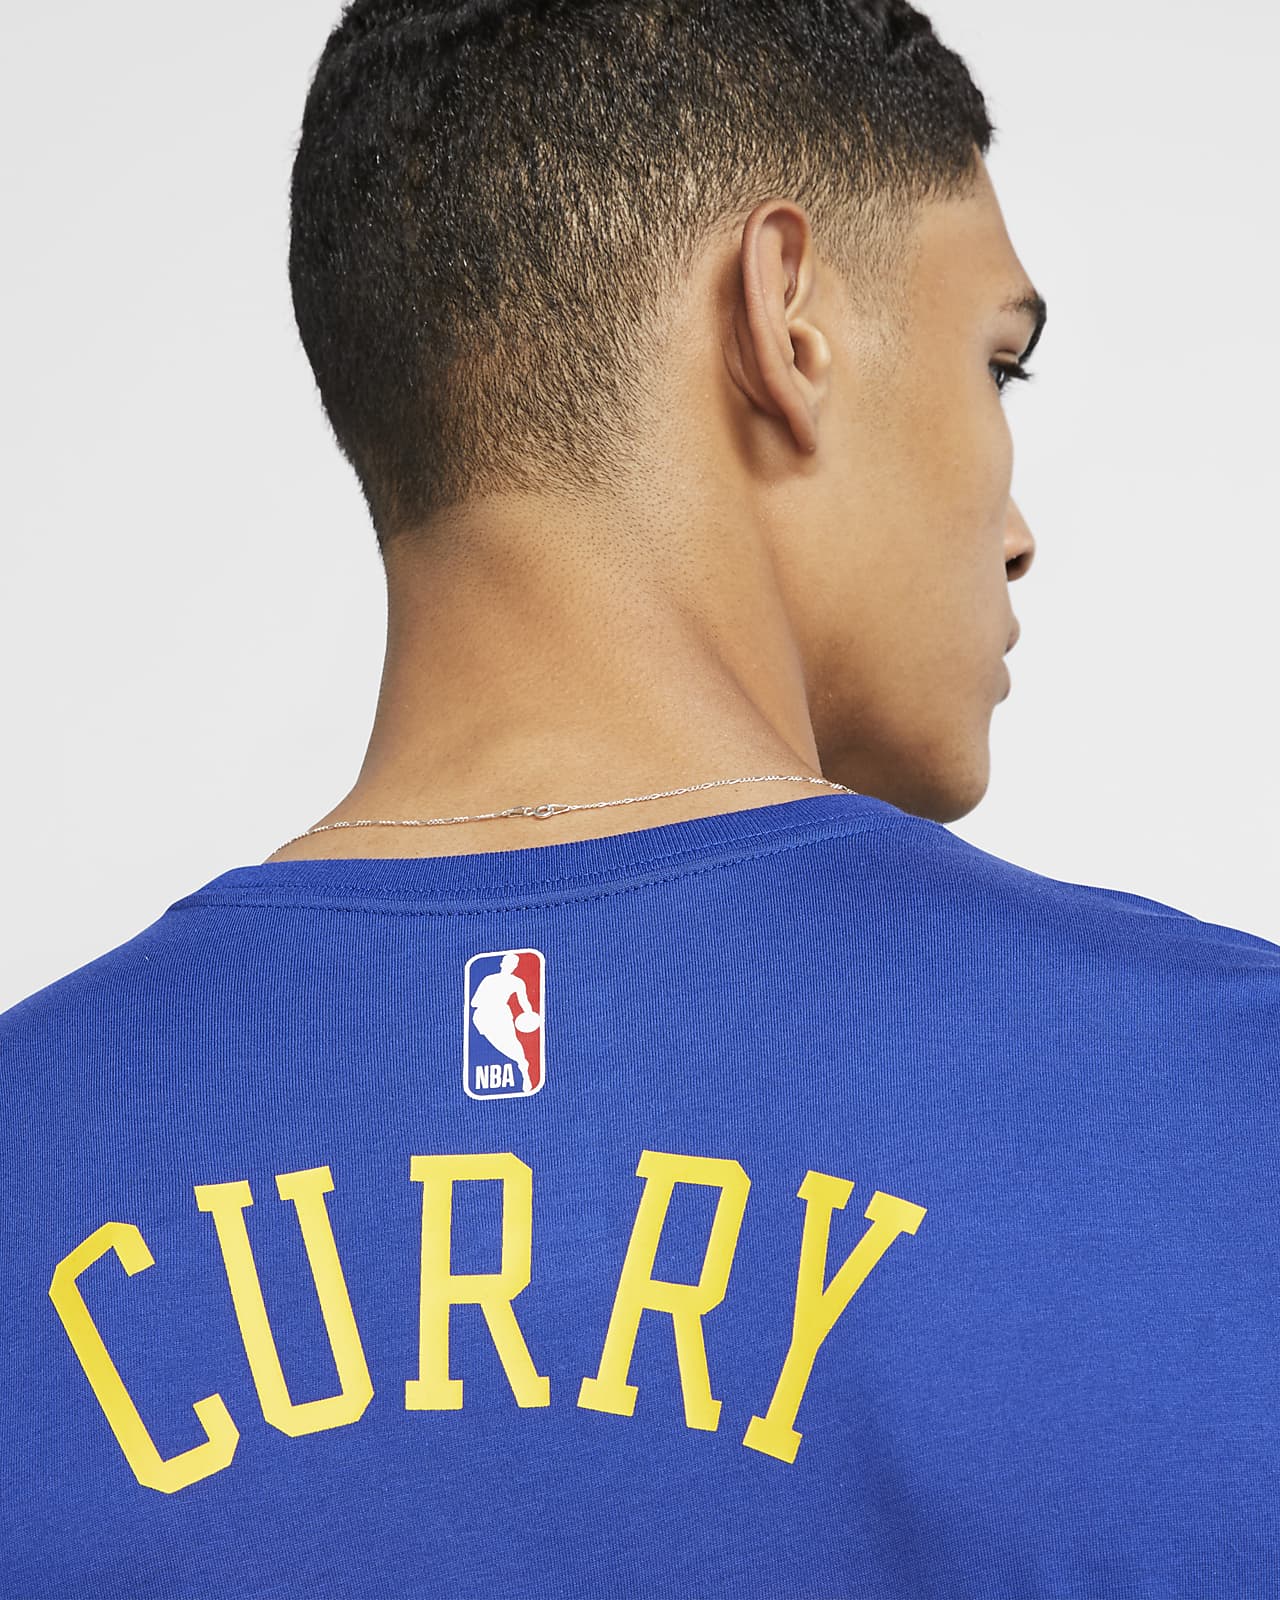 steph curry jersey youth xl